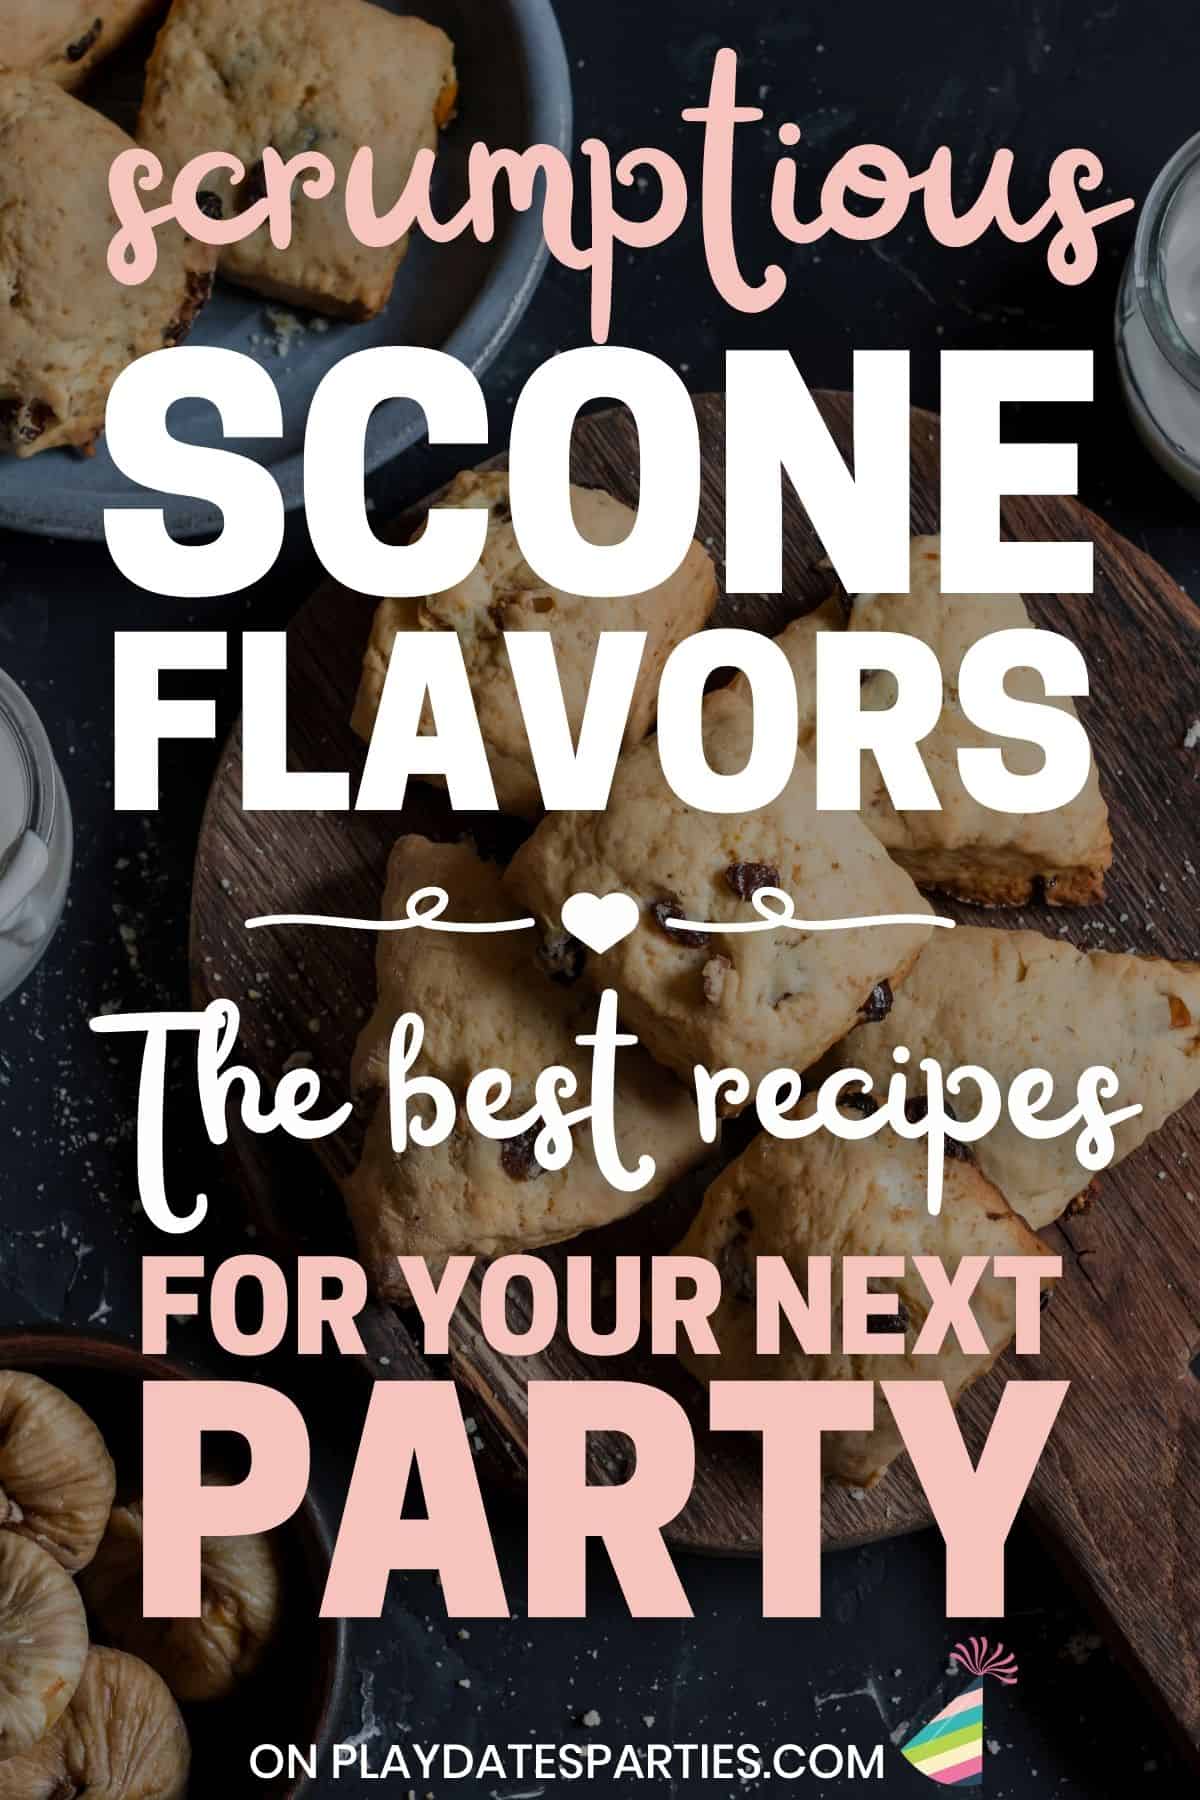 A dark table with scones spread out and text overlay scrumptious scone flavors - the best recipes for your next party.